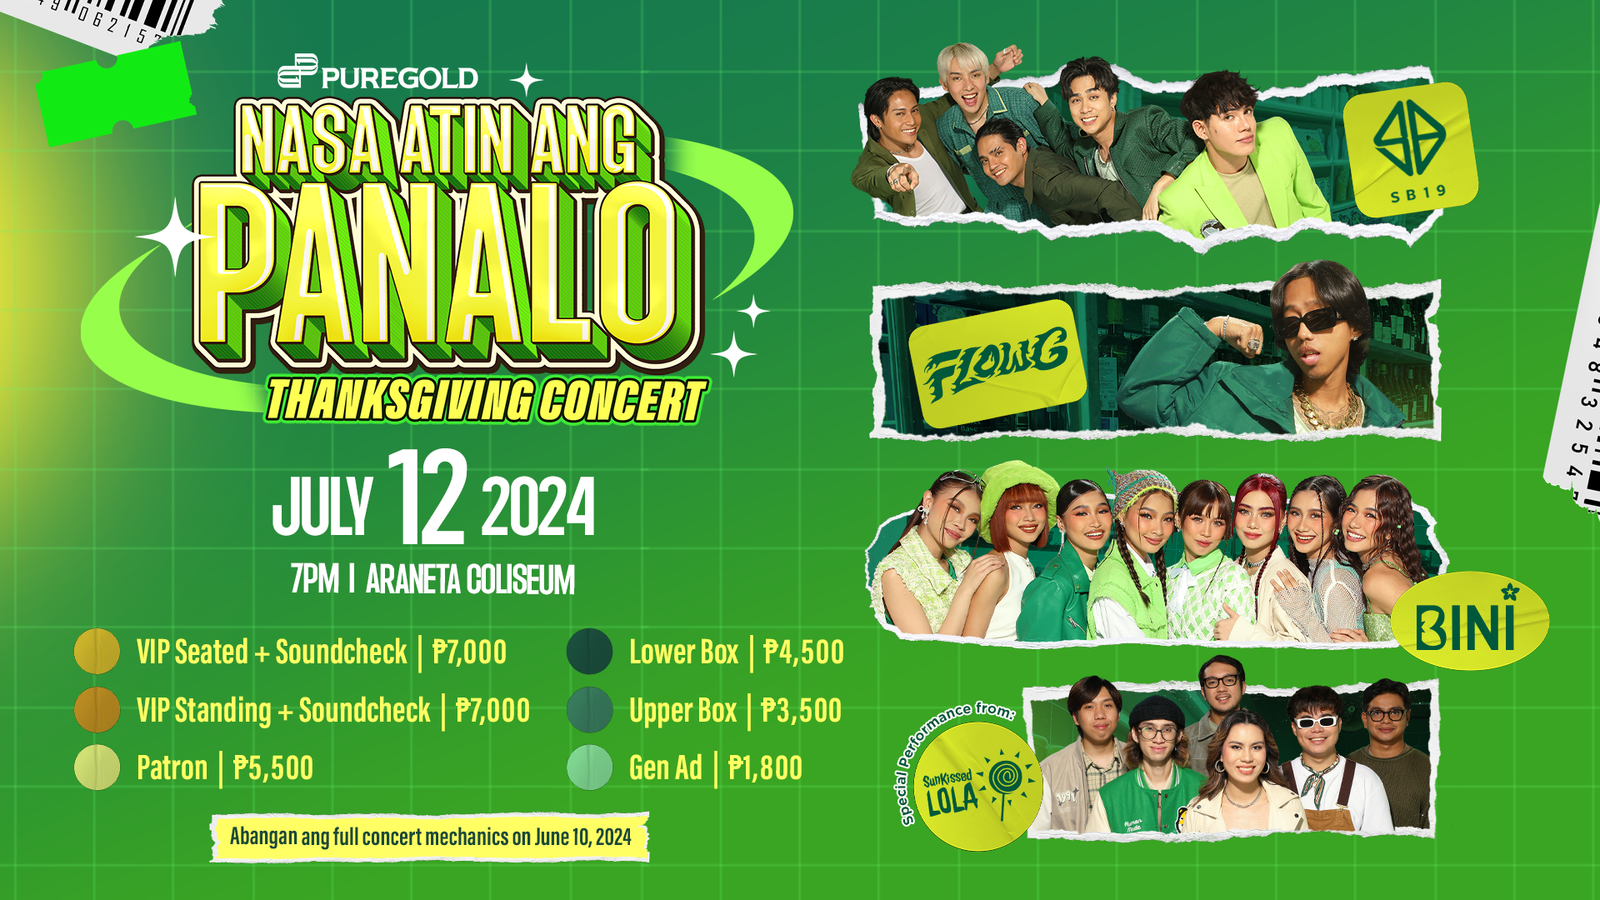 SB19, Bini, Flow G, SunKissed Lola Set to Headline OPM Event of the Year: Puregold’s ‘Nasa Atin Ang Panalo’ Concert